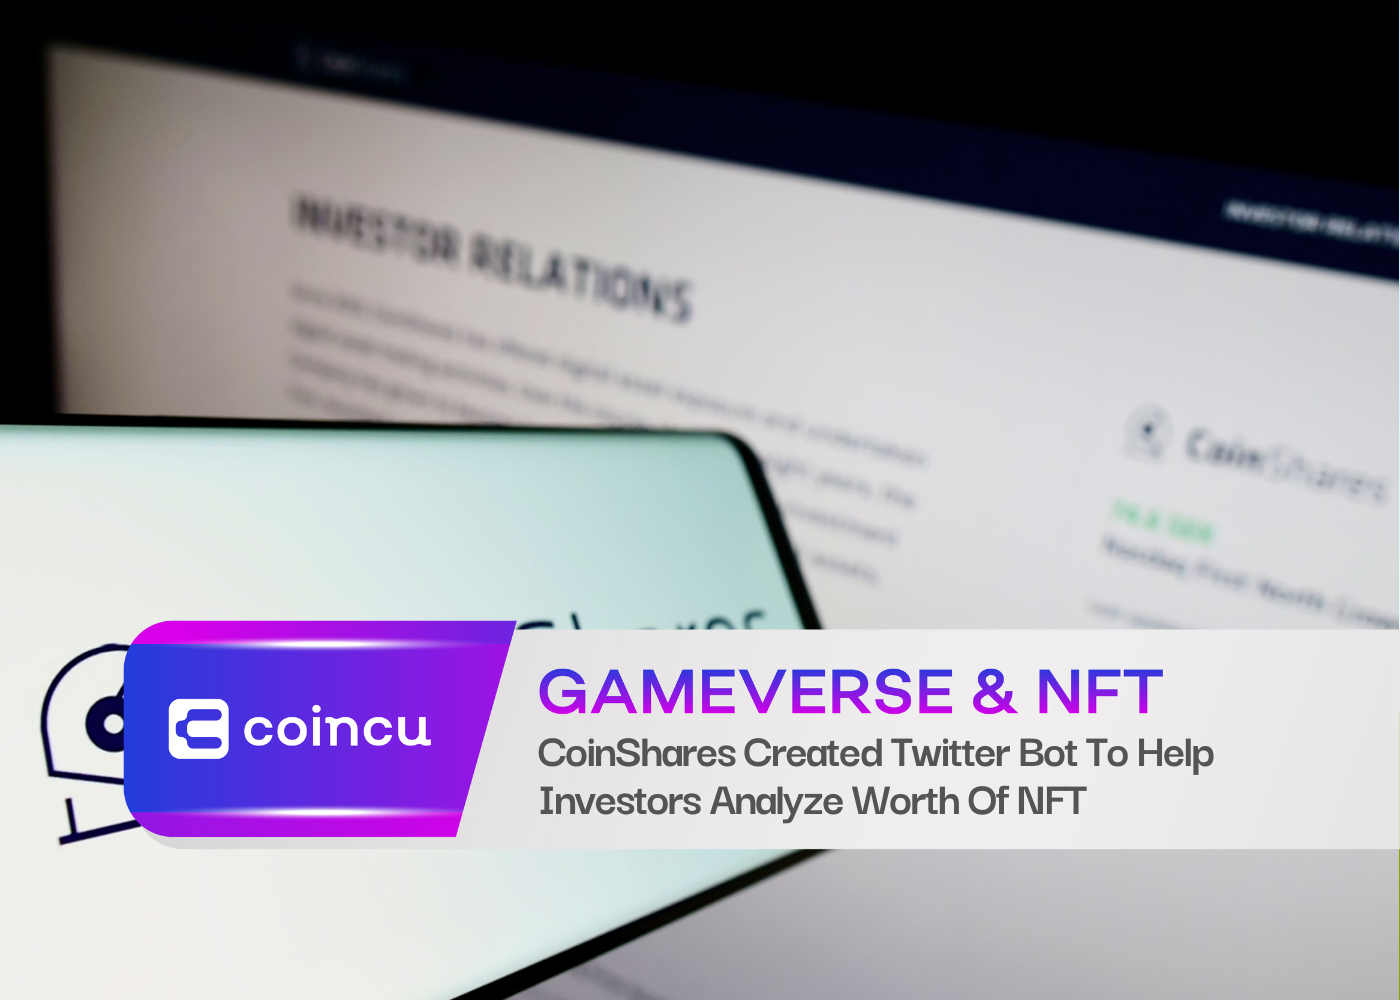 CoinShares Created Twitter Bot To Help Investors Analyze Worth Of NFT